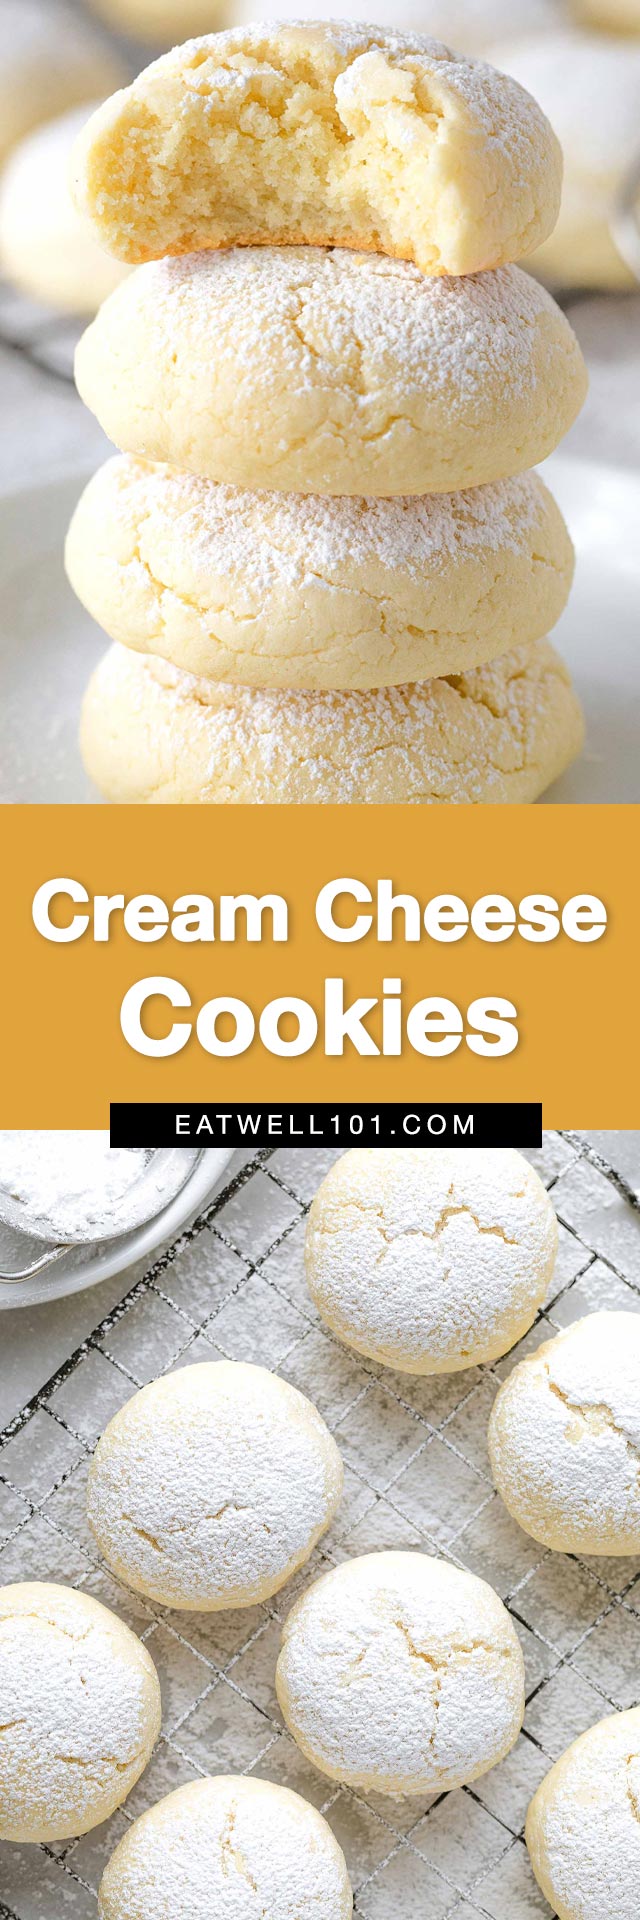 Cream Cheese Cookies - #cookies #recipe #eatwell101 - Soft, dense and flavorful inside, these cream cheese cookies are so soft they literally melt in your mouth. 